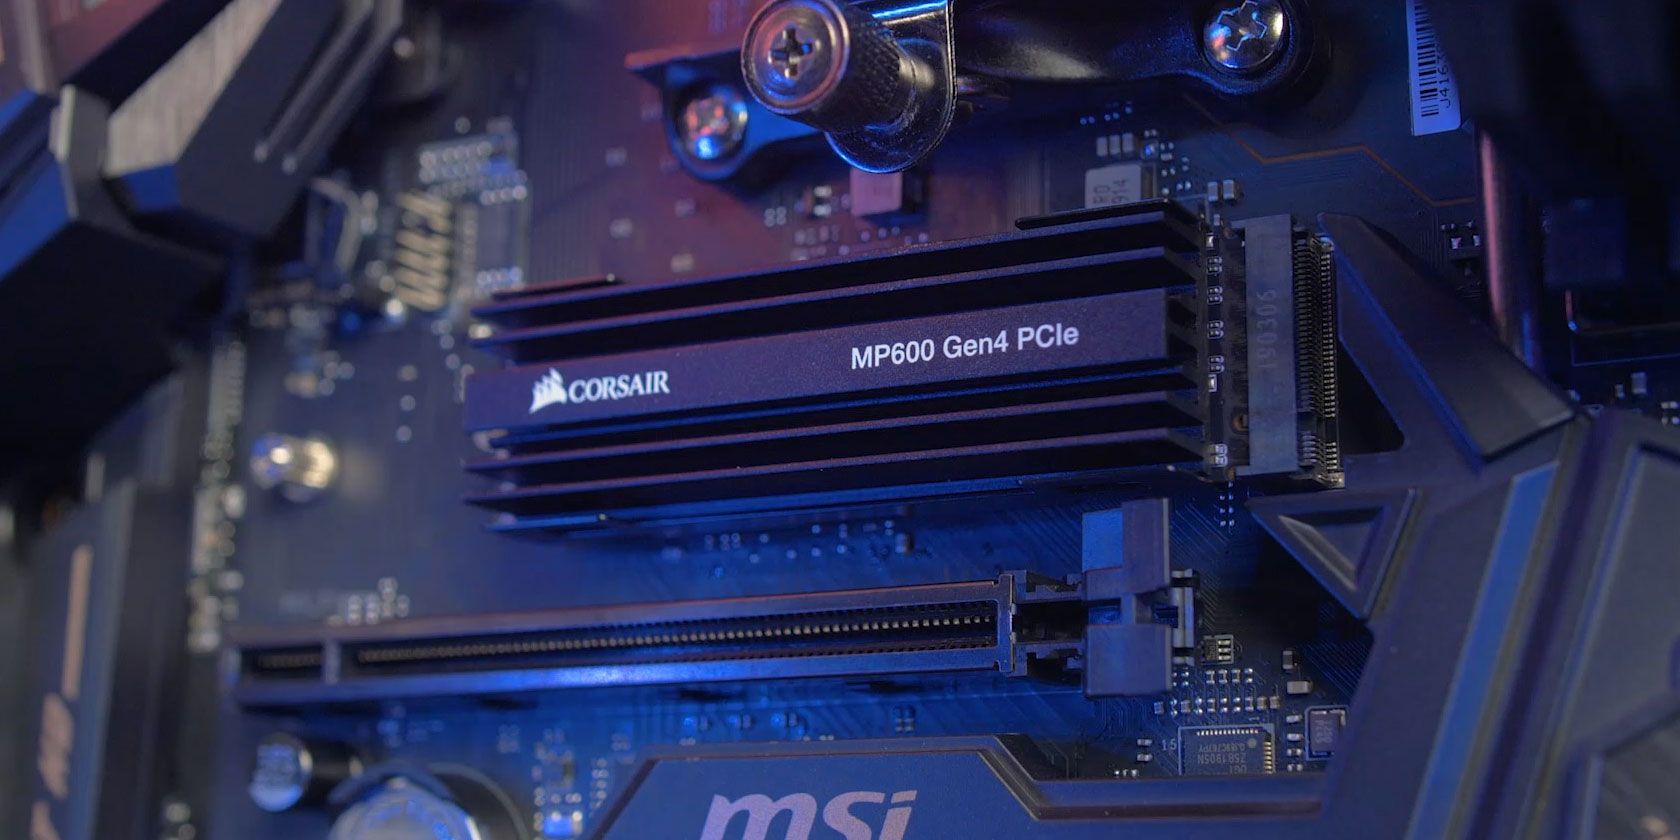 A Corsair NVMe SSD with a heatsink installed in a PC.